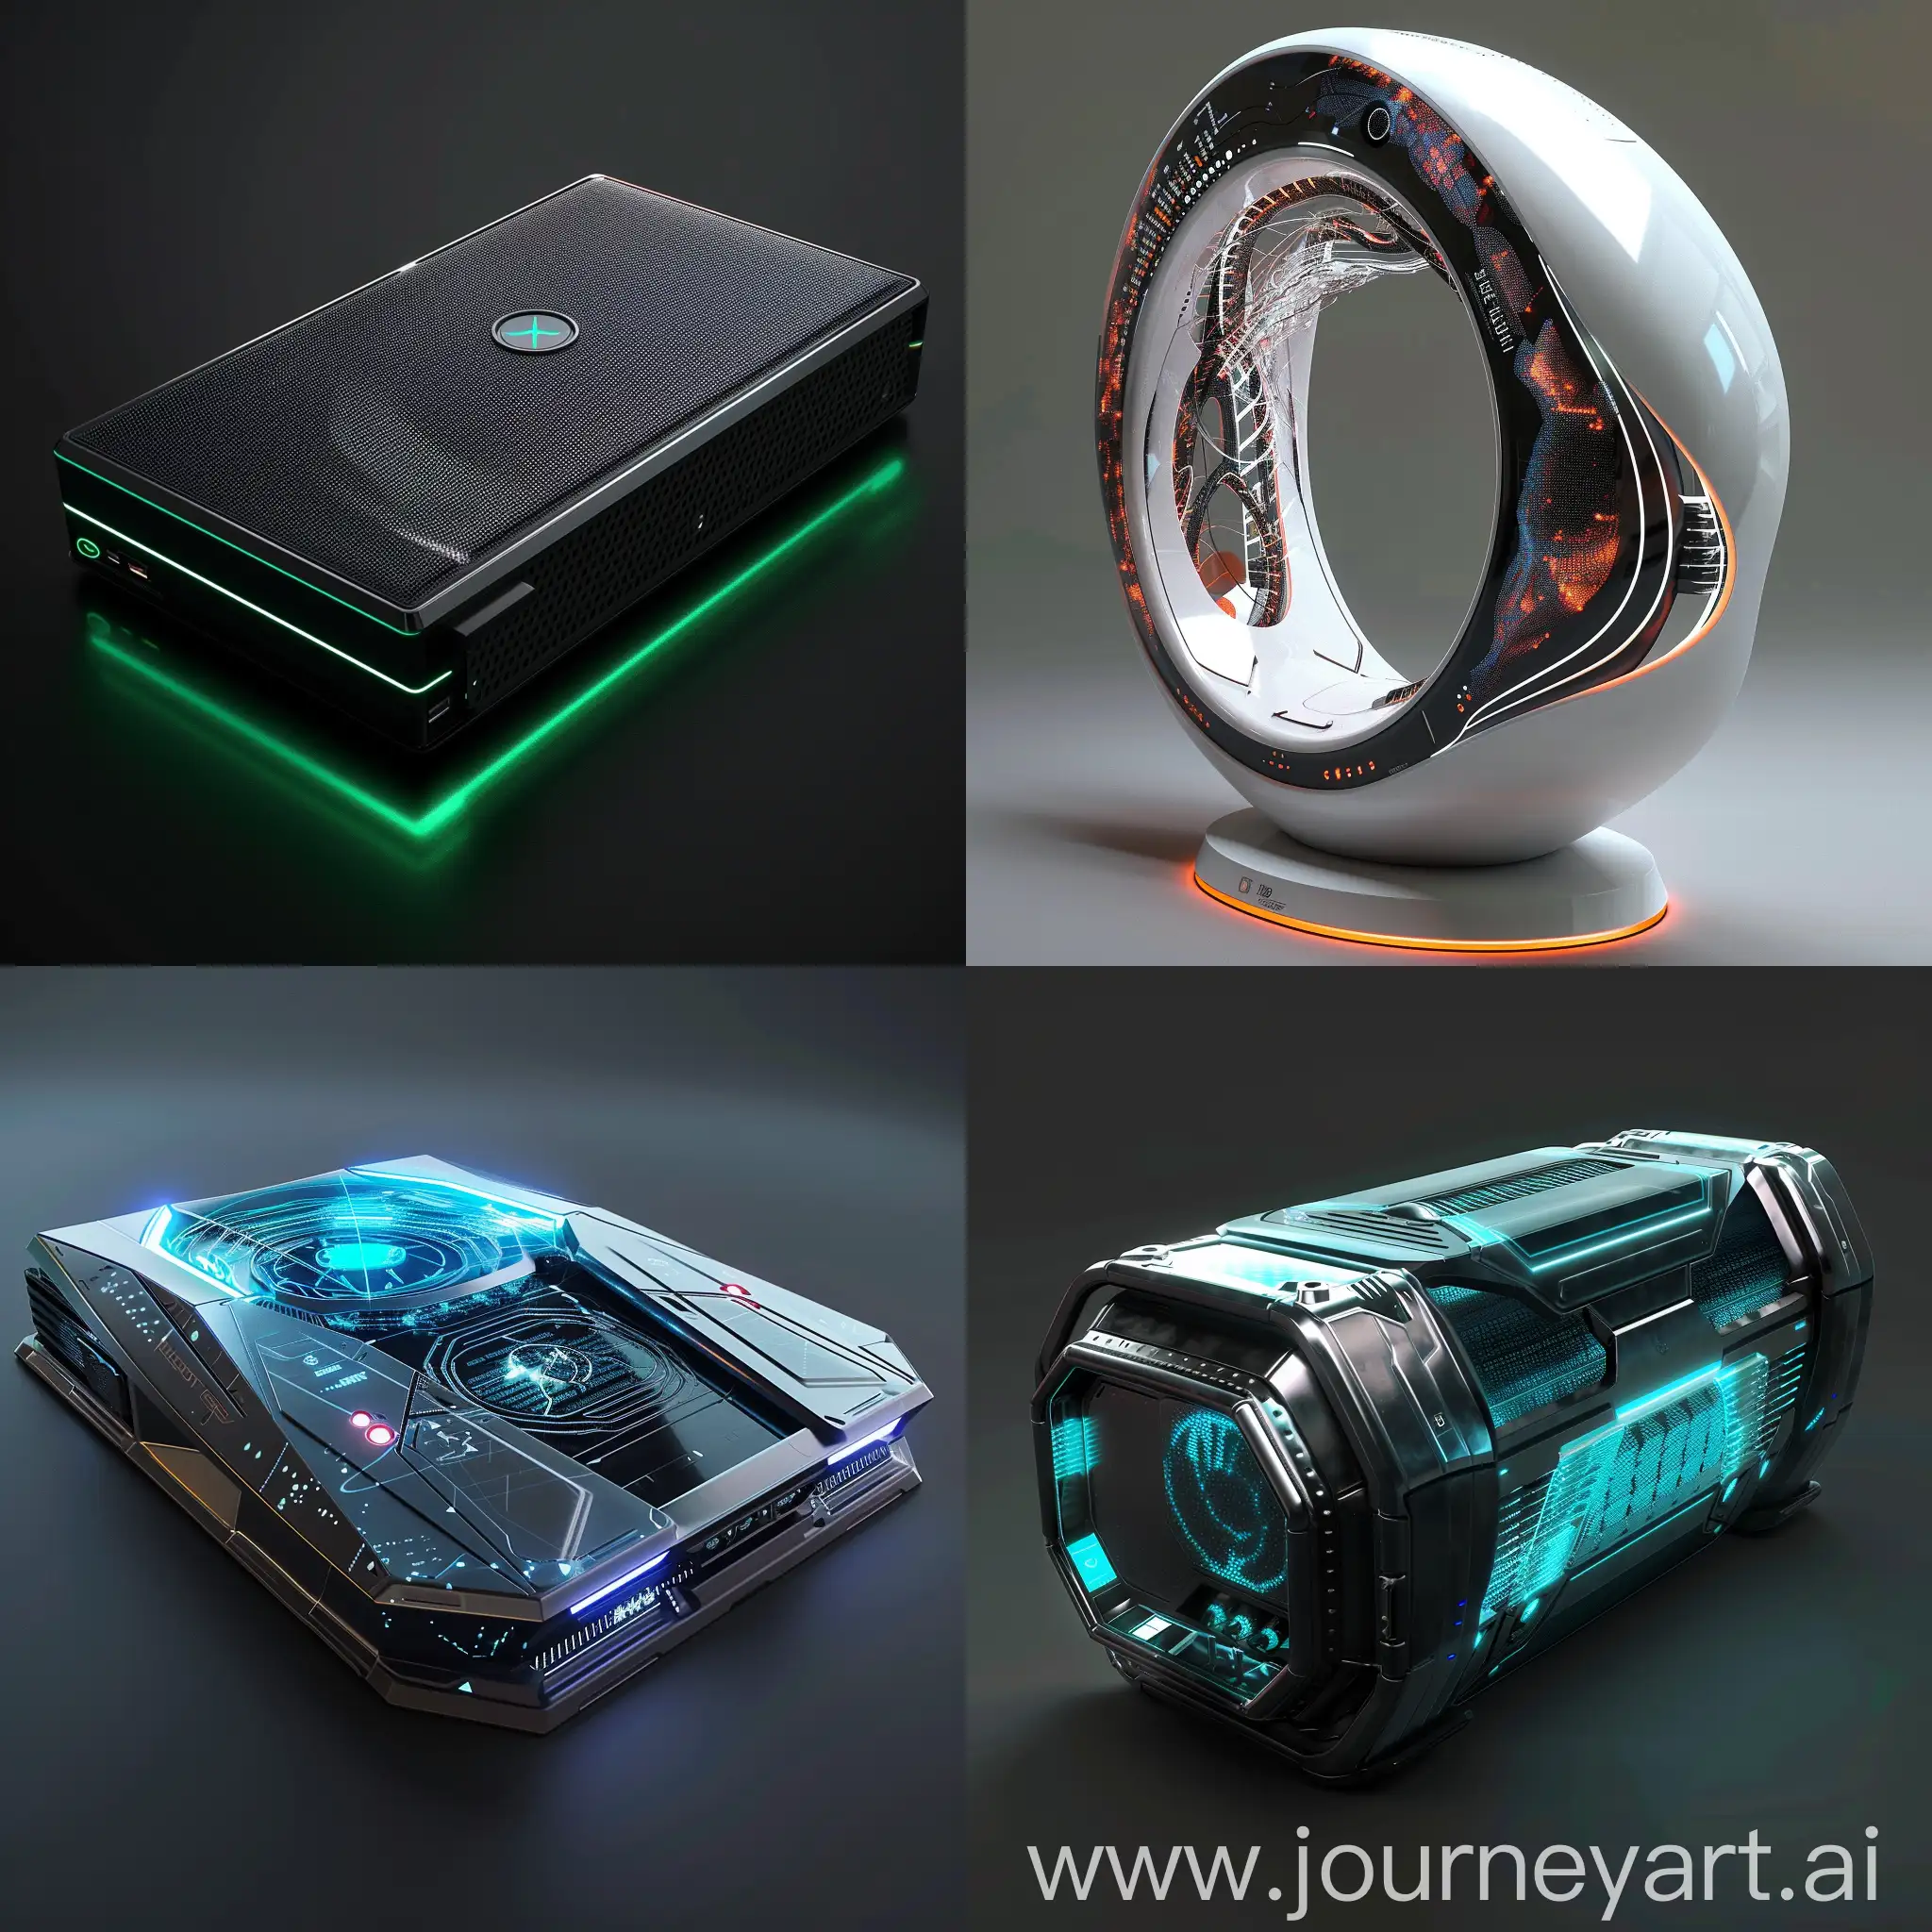 Futuristic-SciFi-Gaming-Console-with-Quantum-Processing-and-Holographic-Display